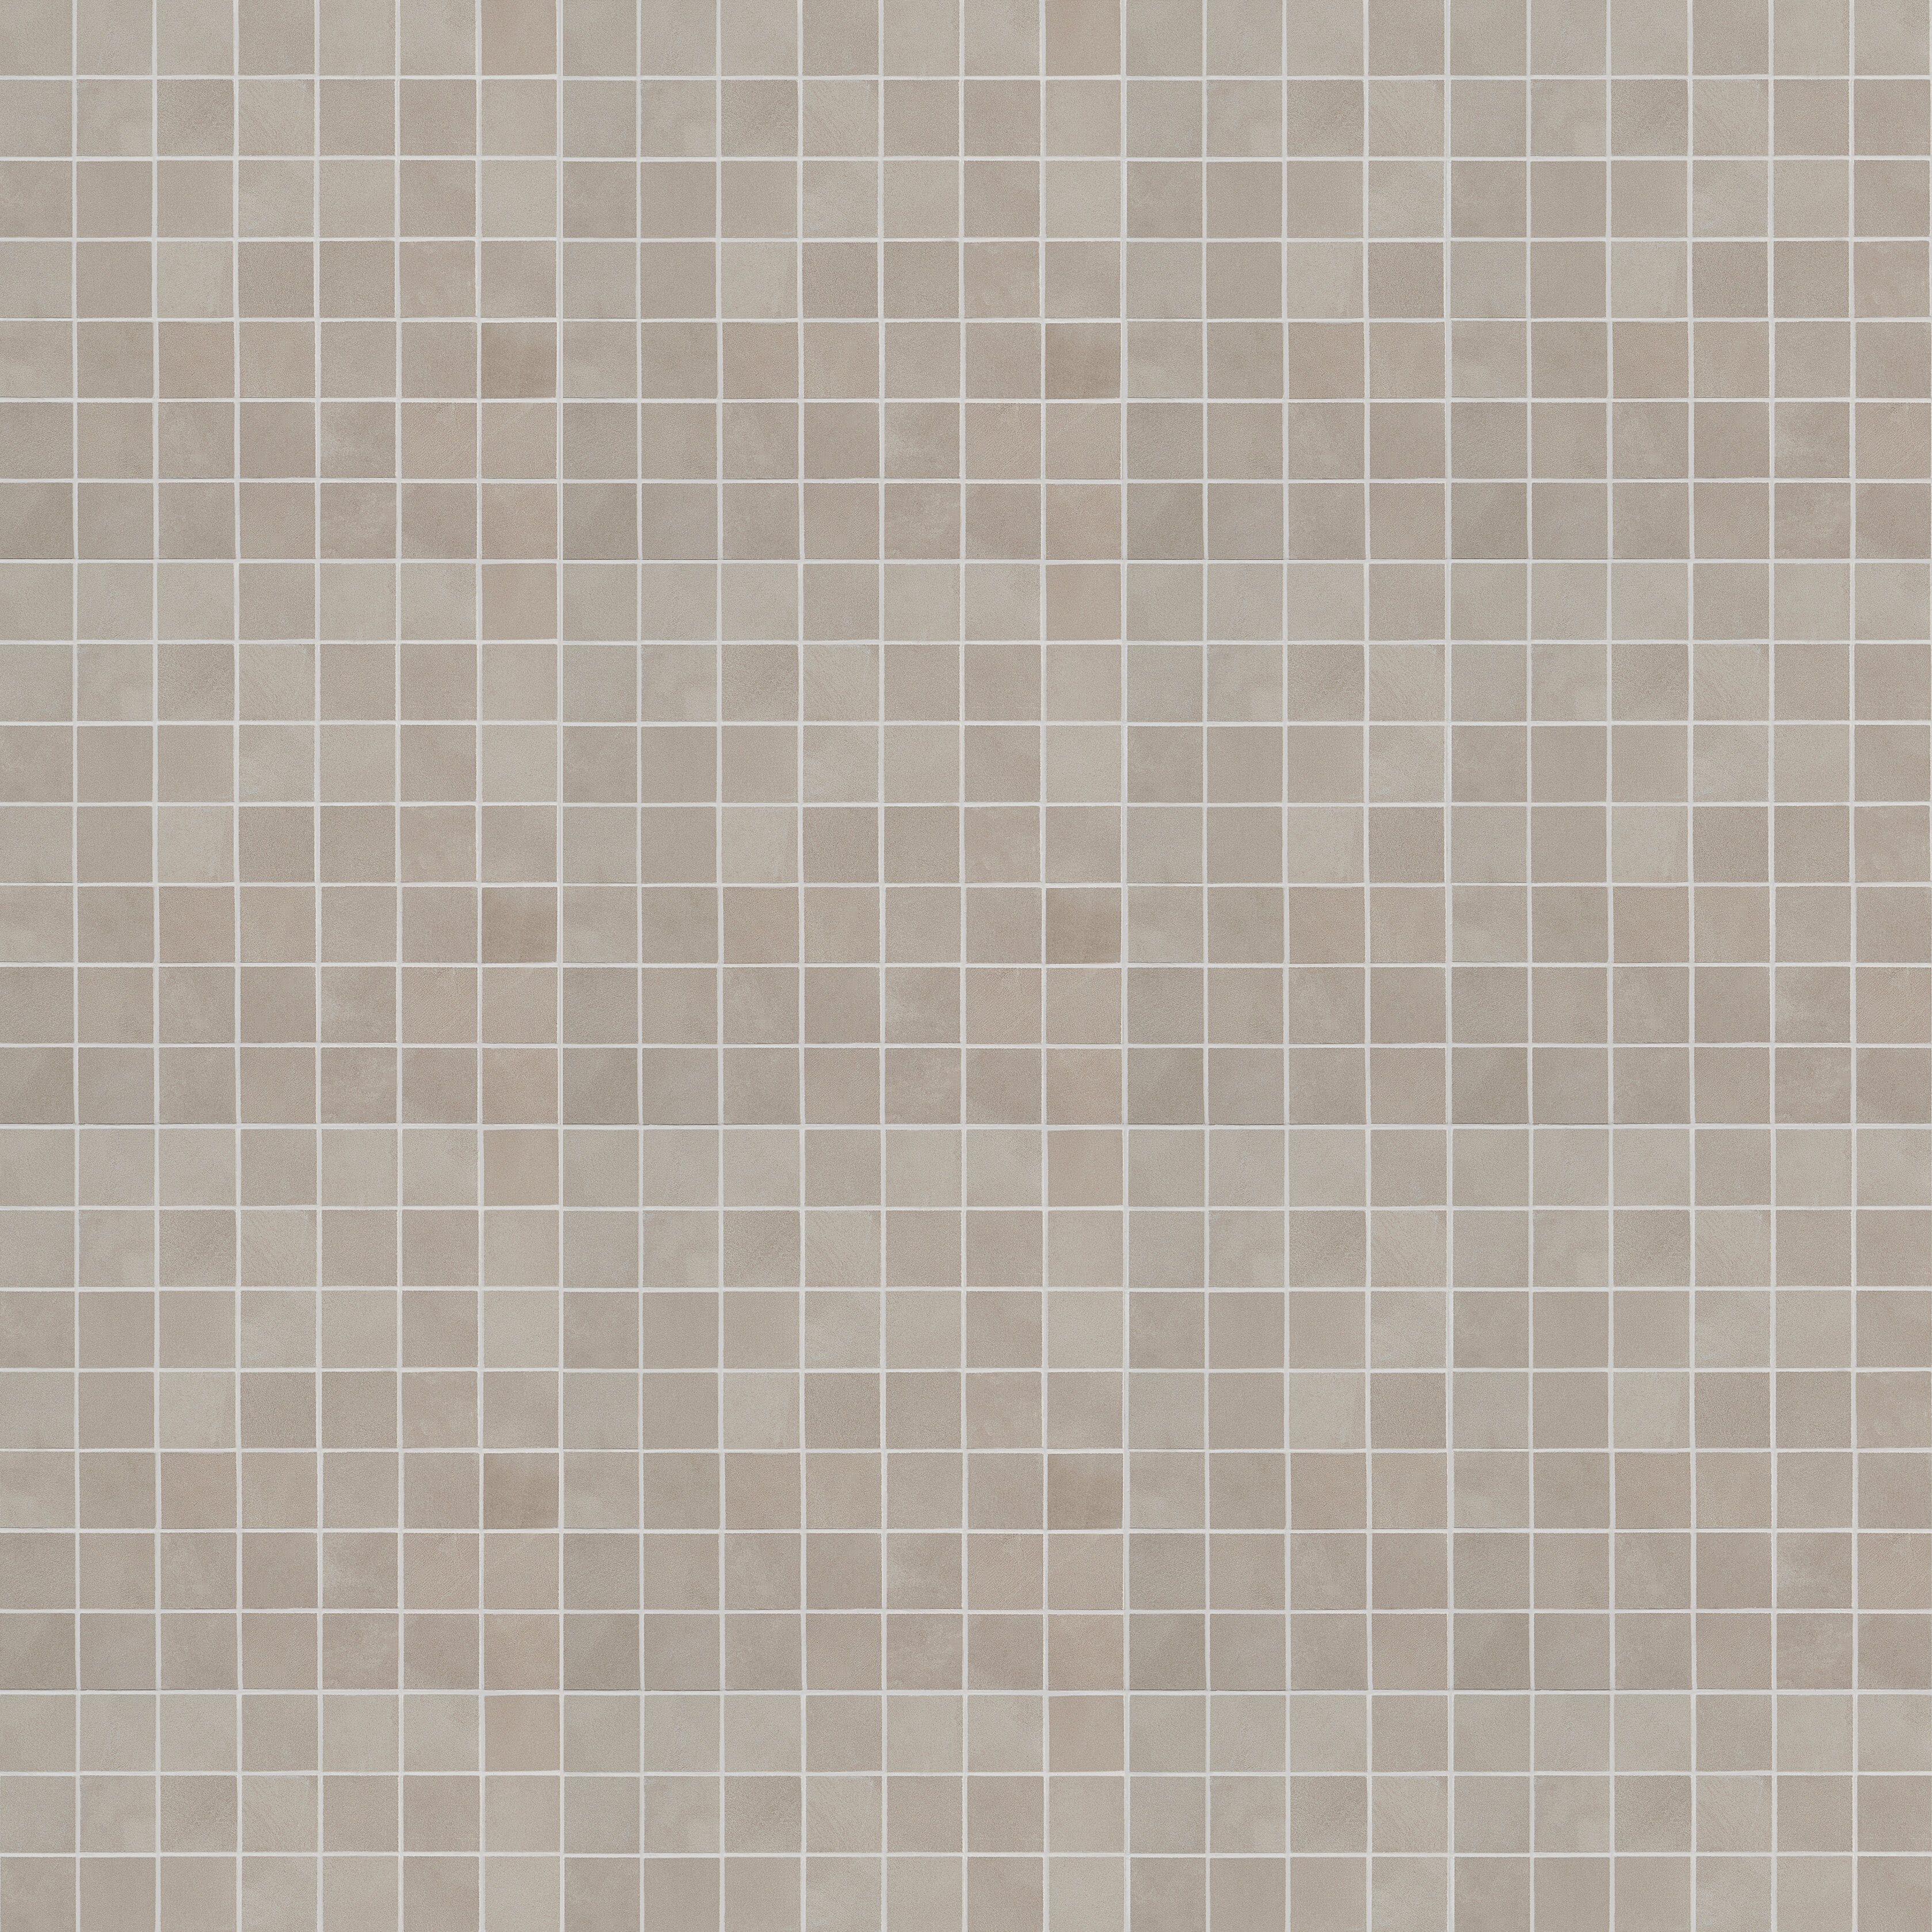 Ryx 11.81 in. x 11.81 in. Matte Porcelain Floor and Wall Mosaic Tile (0.96  Sq. Ft. / Each)